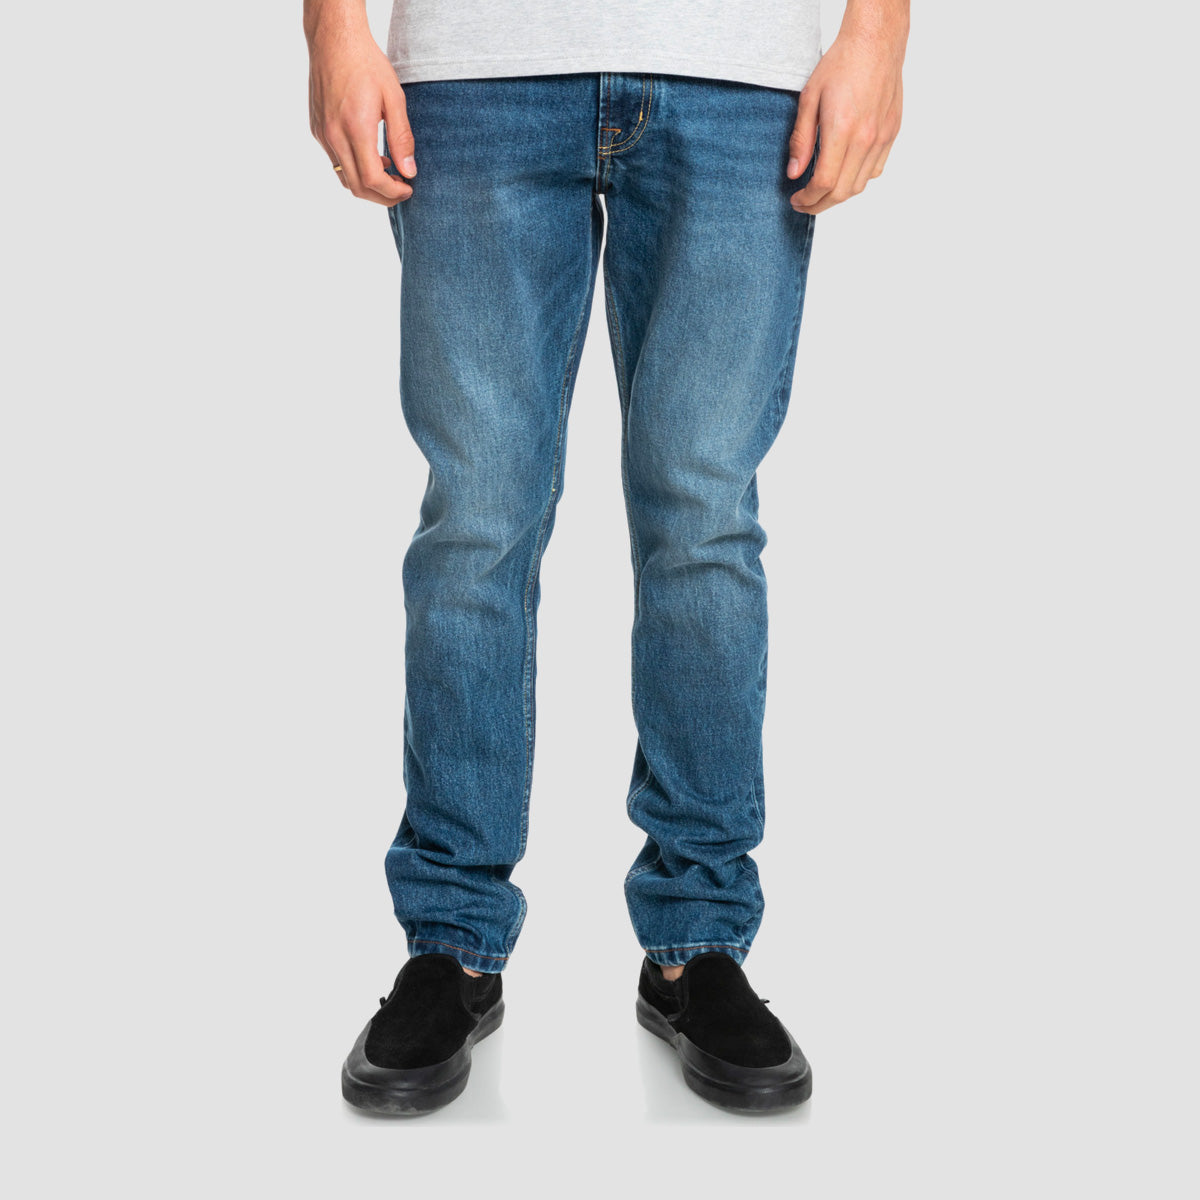 Quiksilver Voodoo Surf Aged Slim Fit Jeans Aged